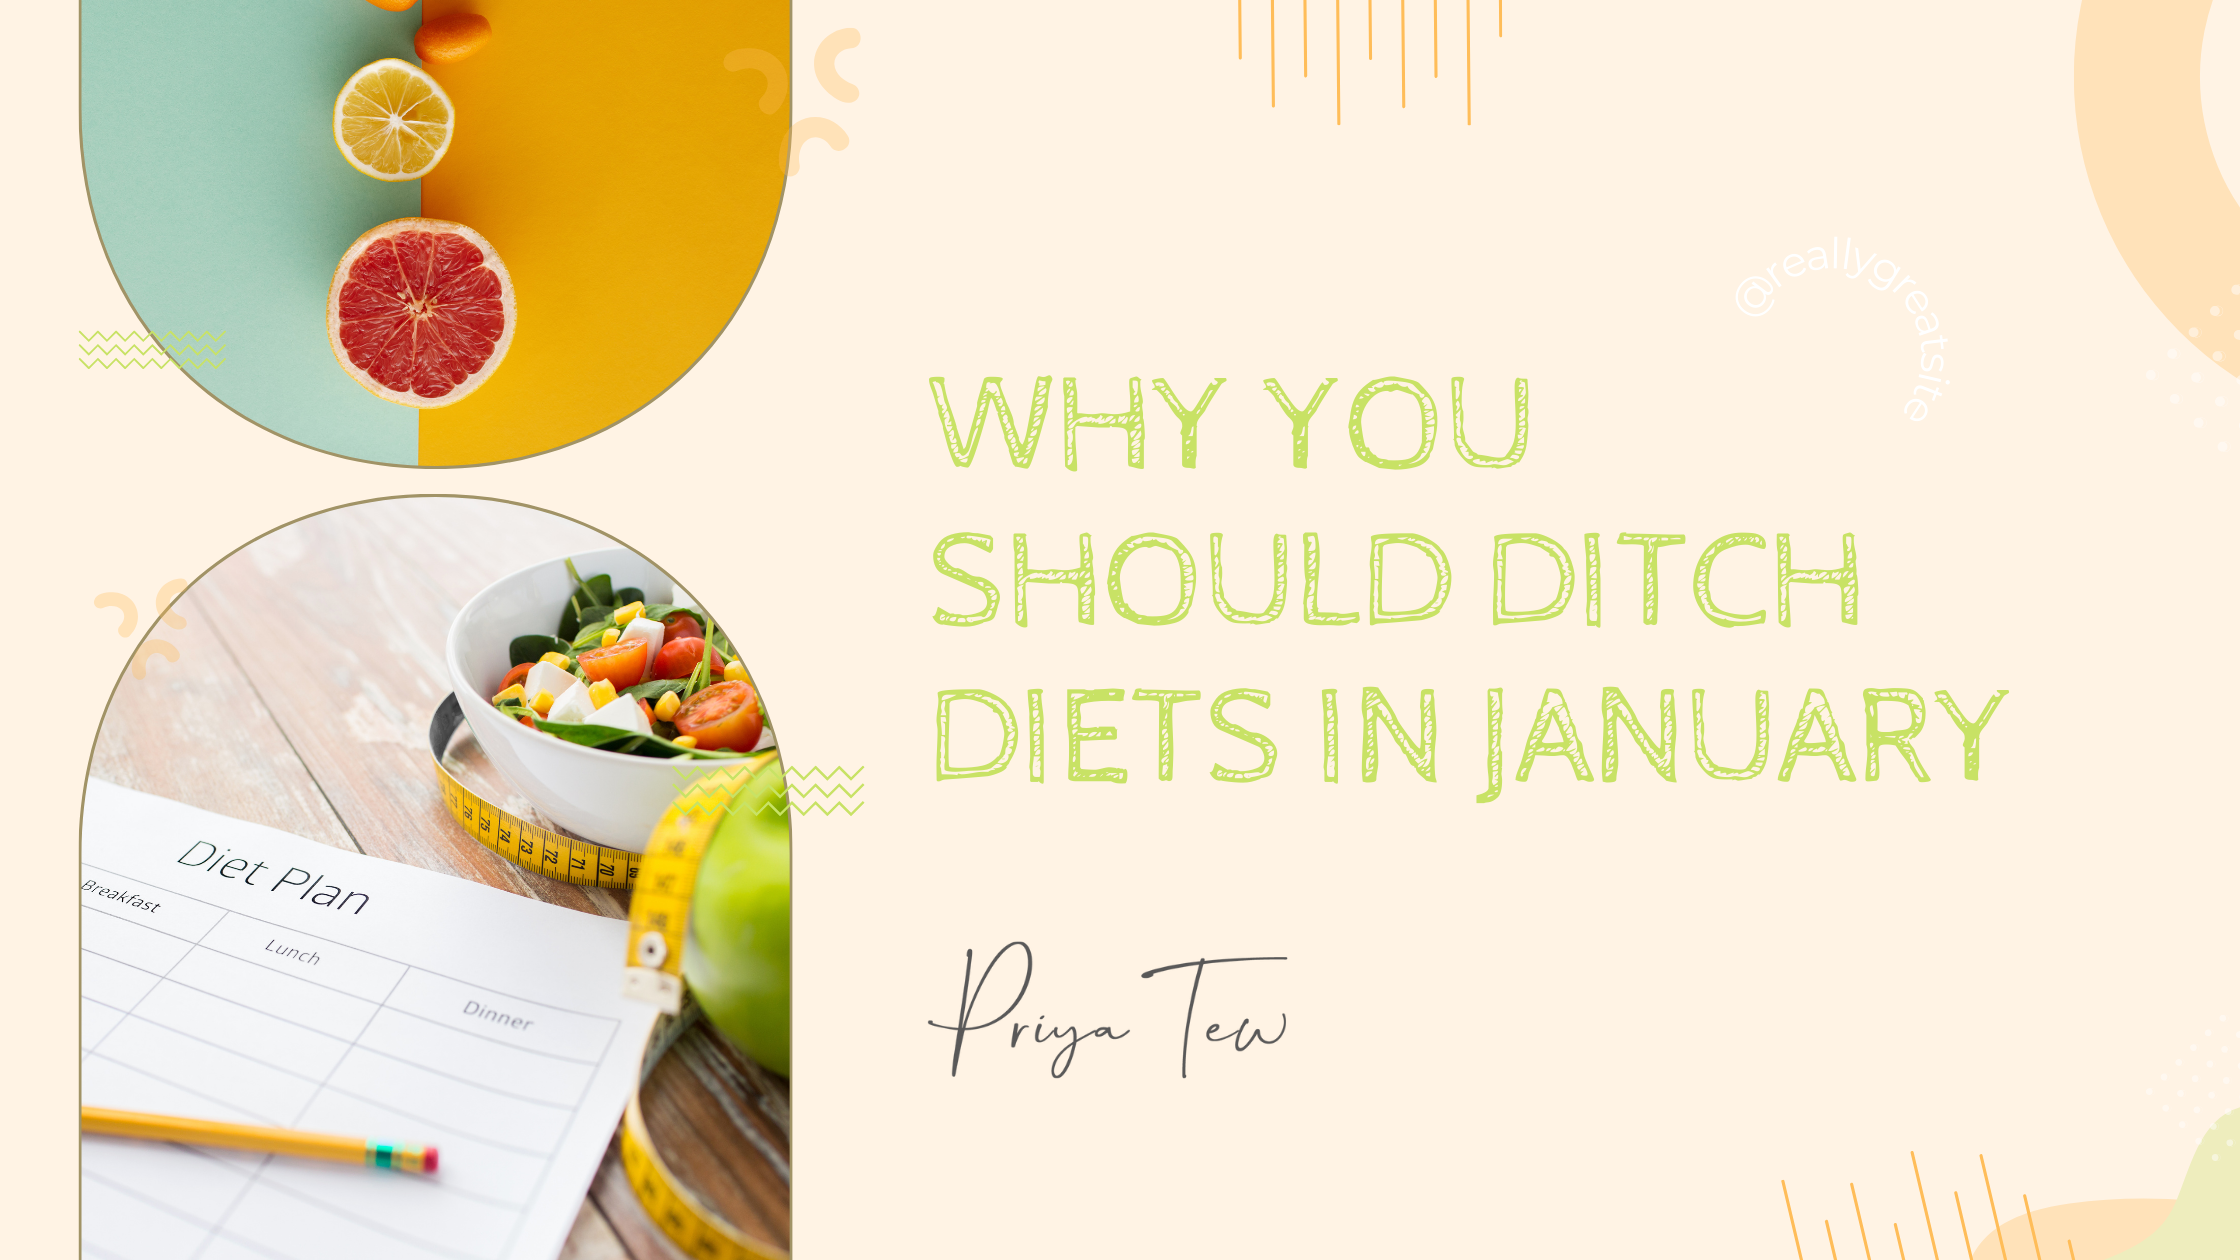 Why you should ditch New Years diets in January